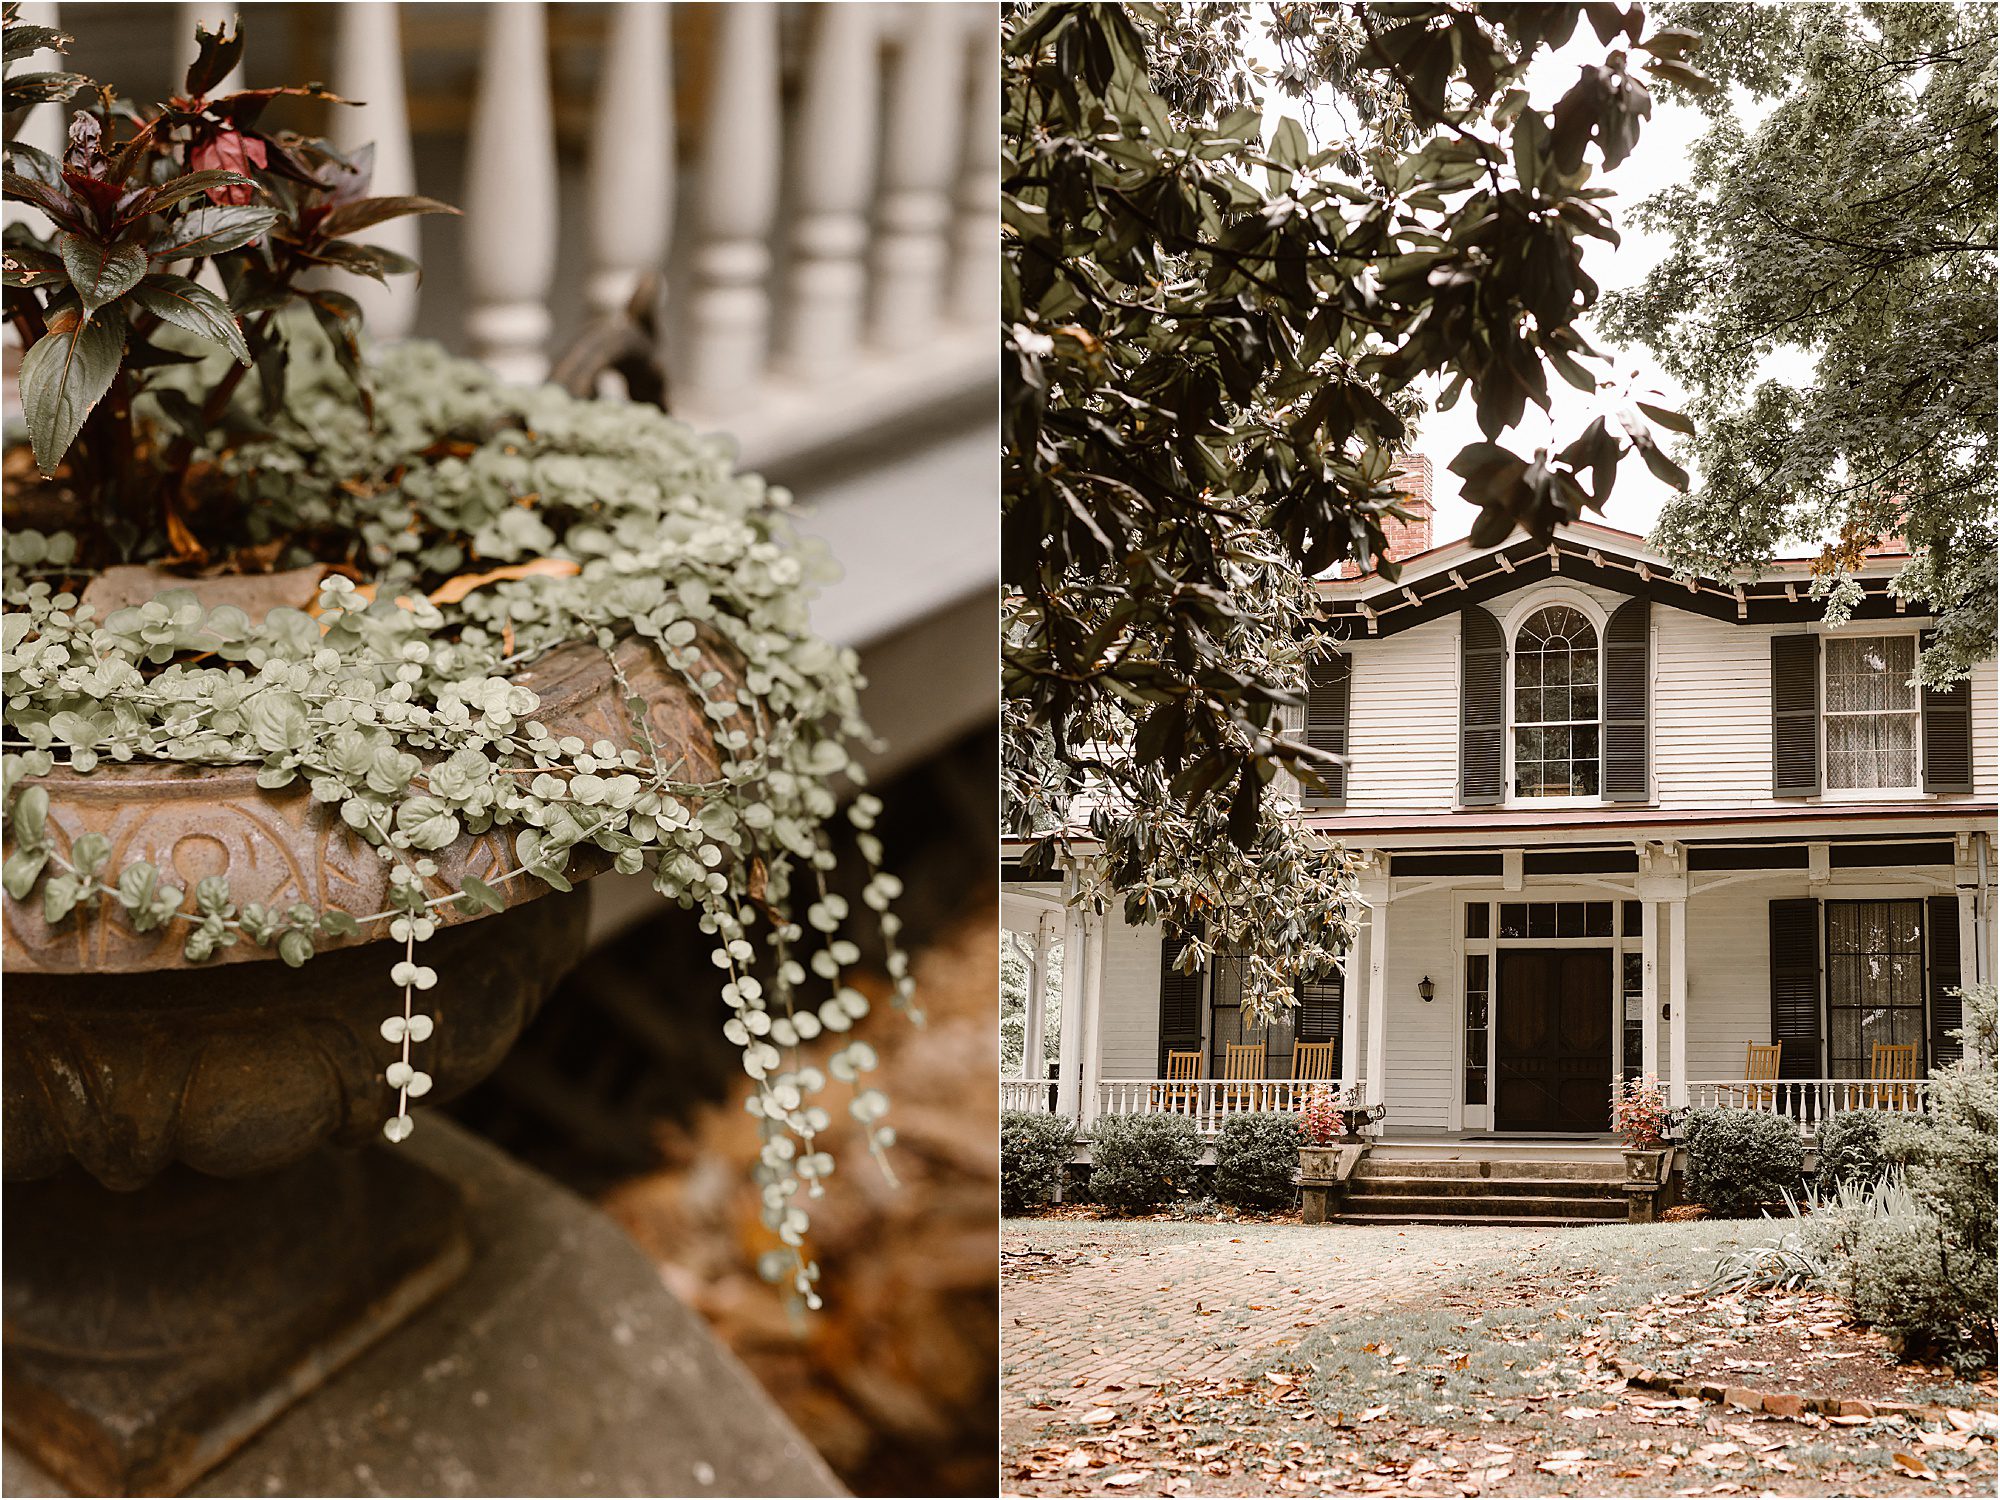 Mabry-Hazen House Outdoor Venue in Knoxville